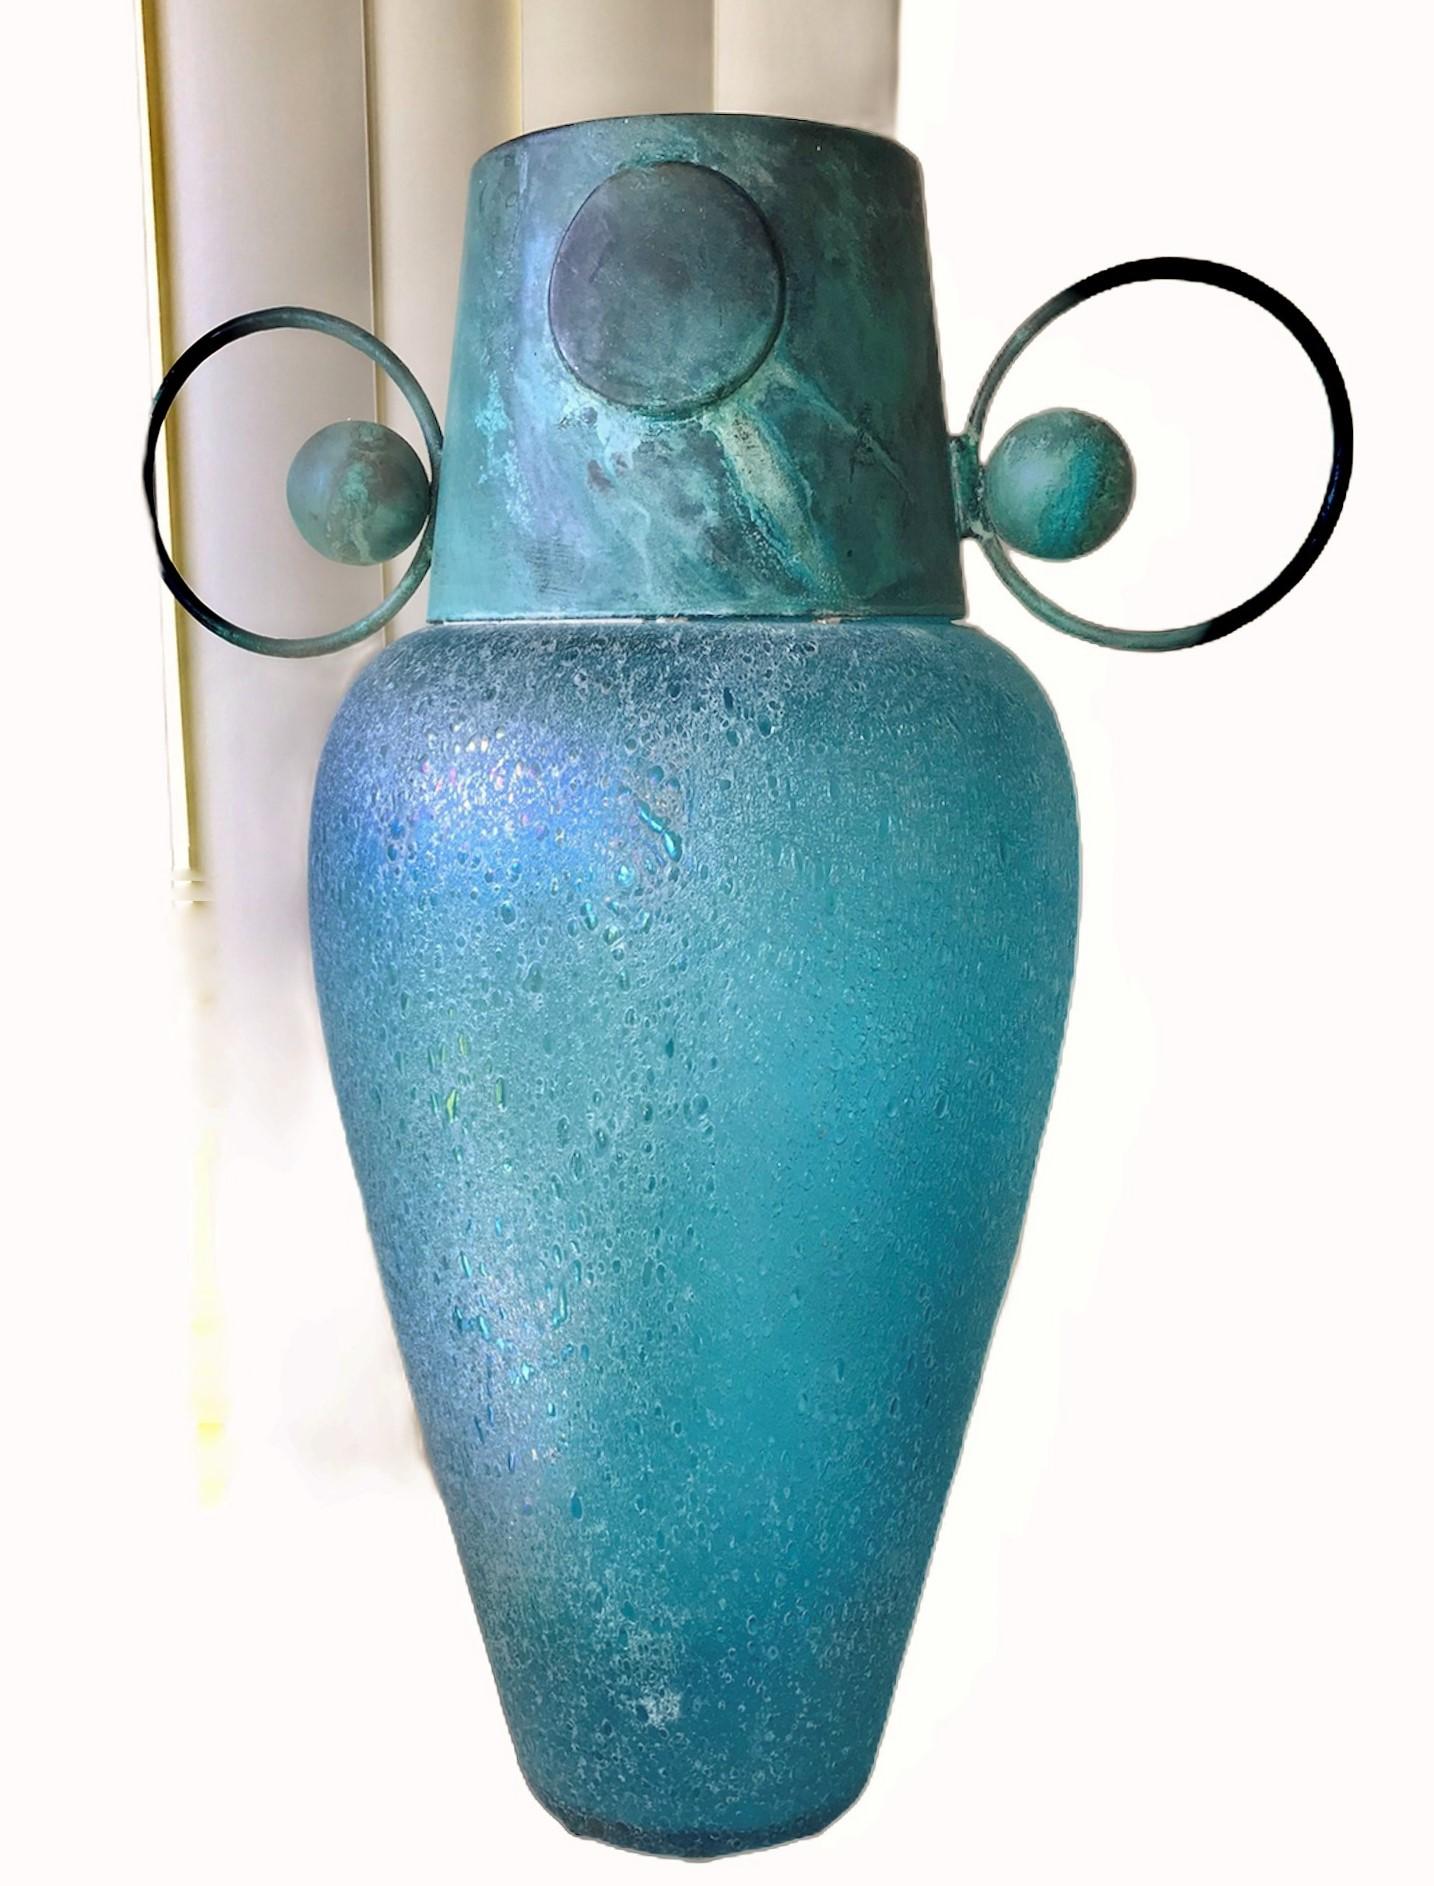 It should have come out of an Egyptian dig, a large mouth blown glass vase with antiqued metal mounts. With inspiration from neoclassical Revival and Art Deco, a 1980 large Pulegoso iridescent glass vase with verdigris metal neck with oversized